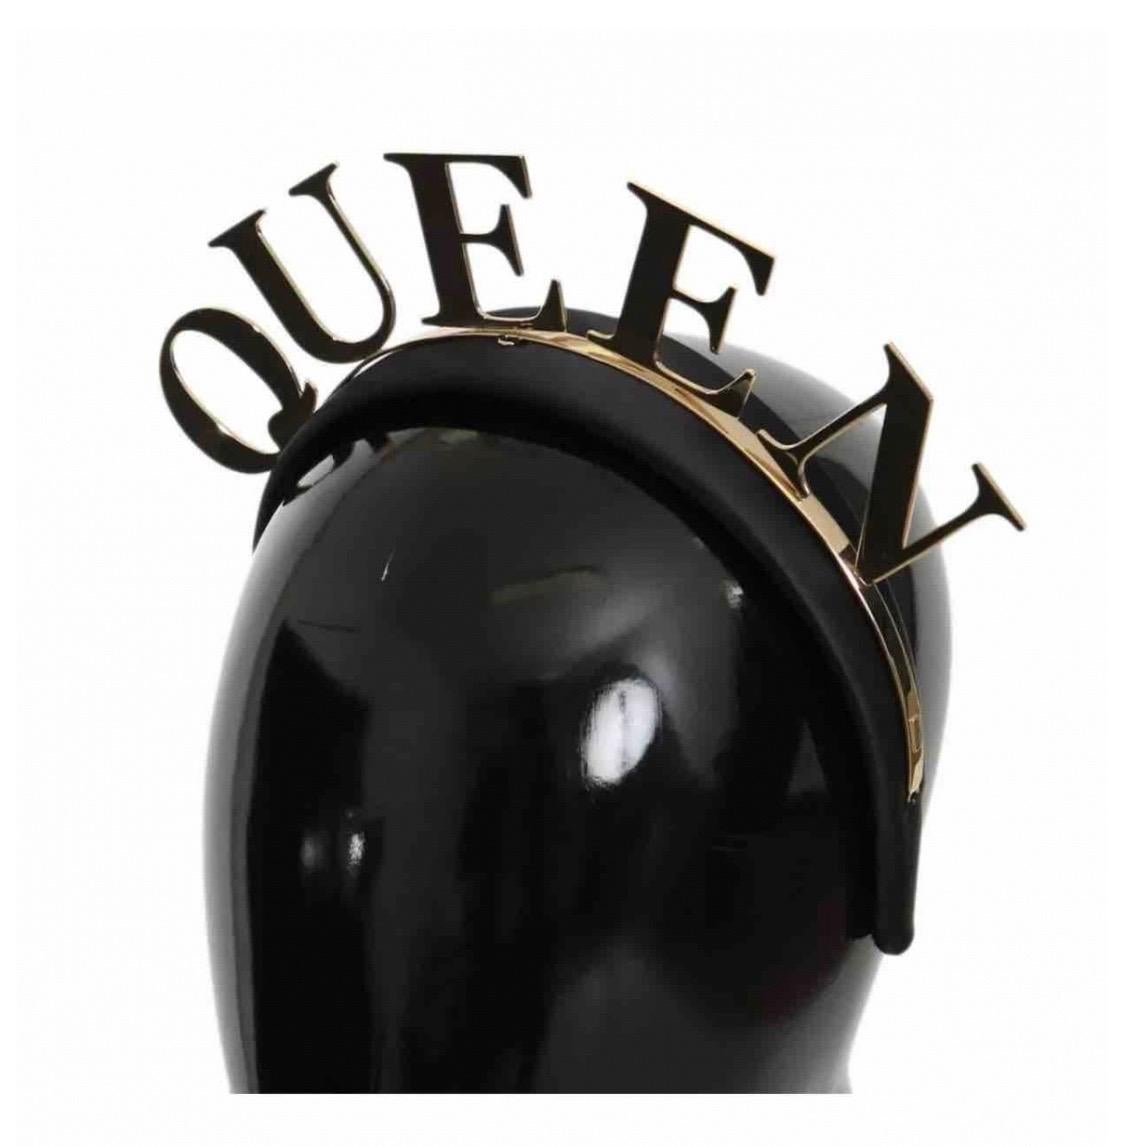 Dolce & Gabbana black #Queen
headband hair accessory tiara
headband

Size: One size

with box!

Please check out my other DG
clothing and accessories!
